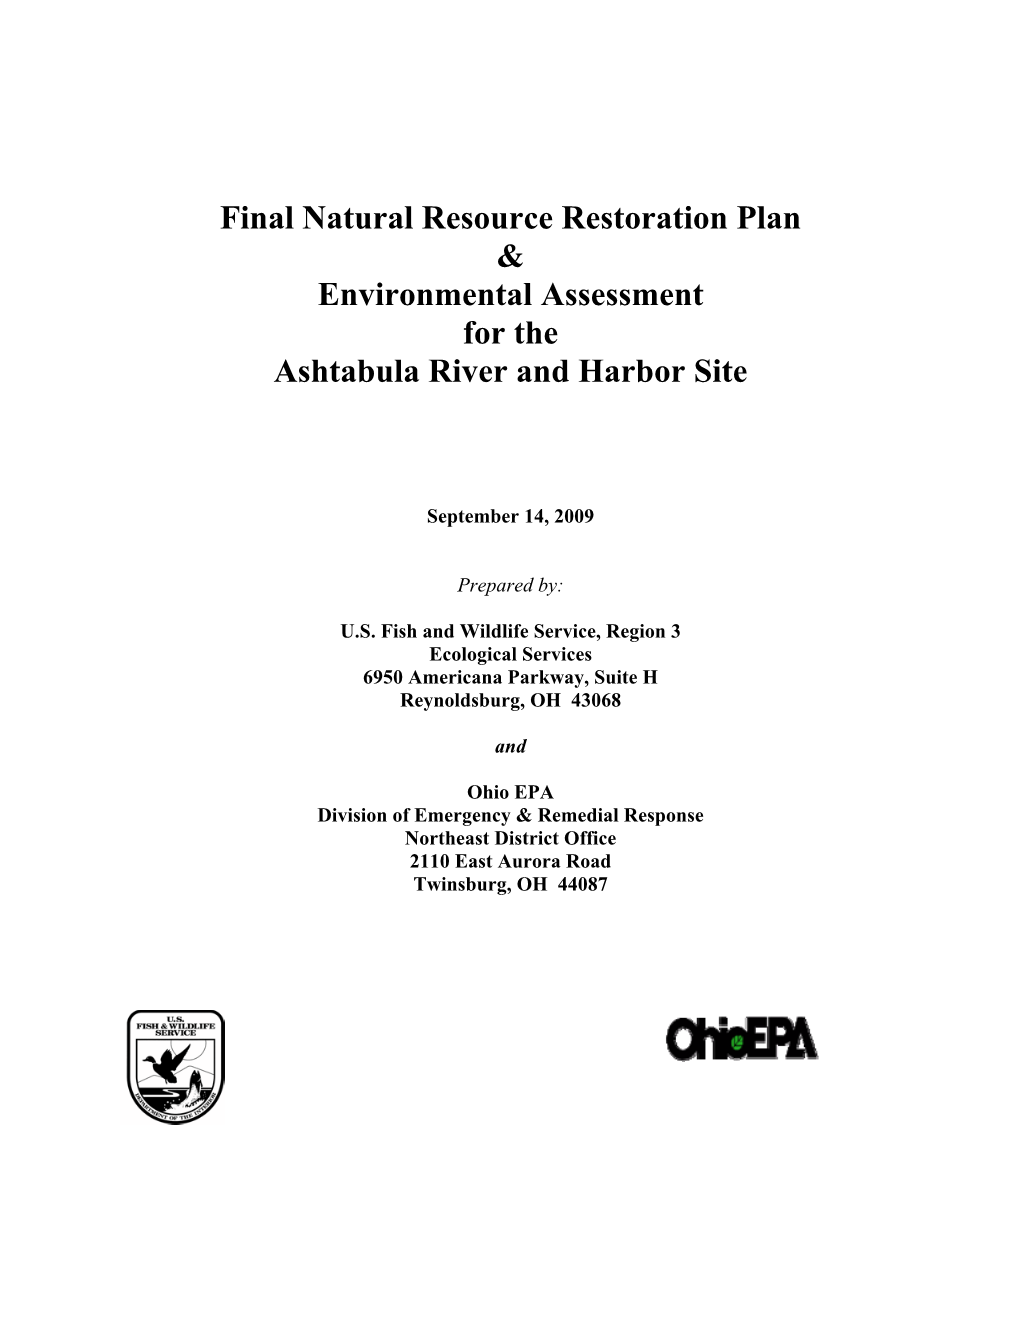 Final Natural Resource Restoration Plan & Environmental Assessment for the Ashtabula River and Harbor Site